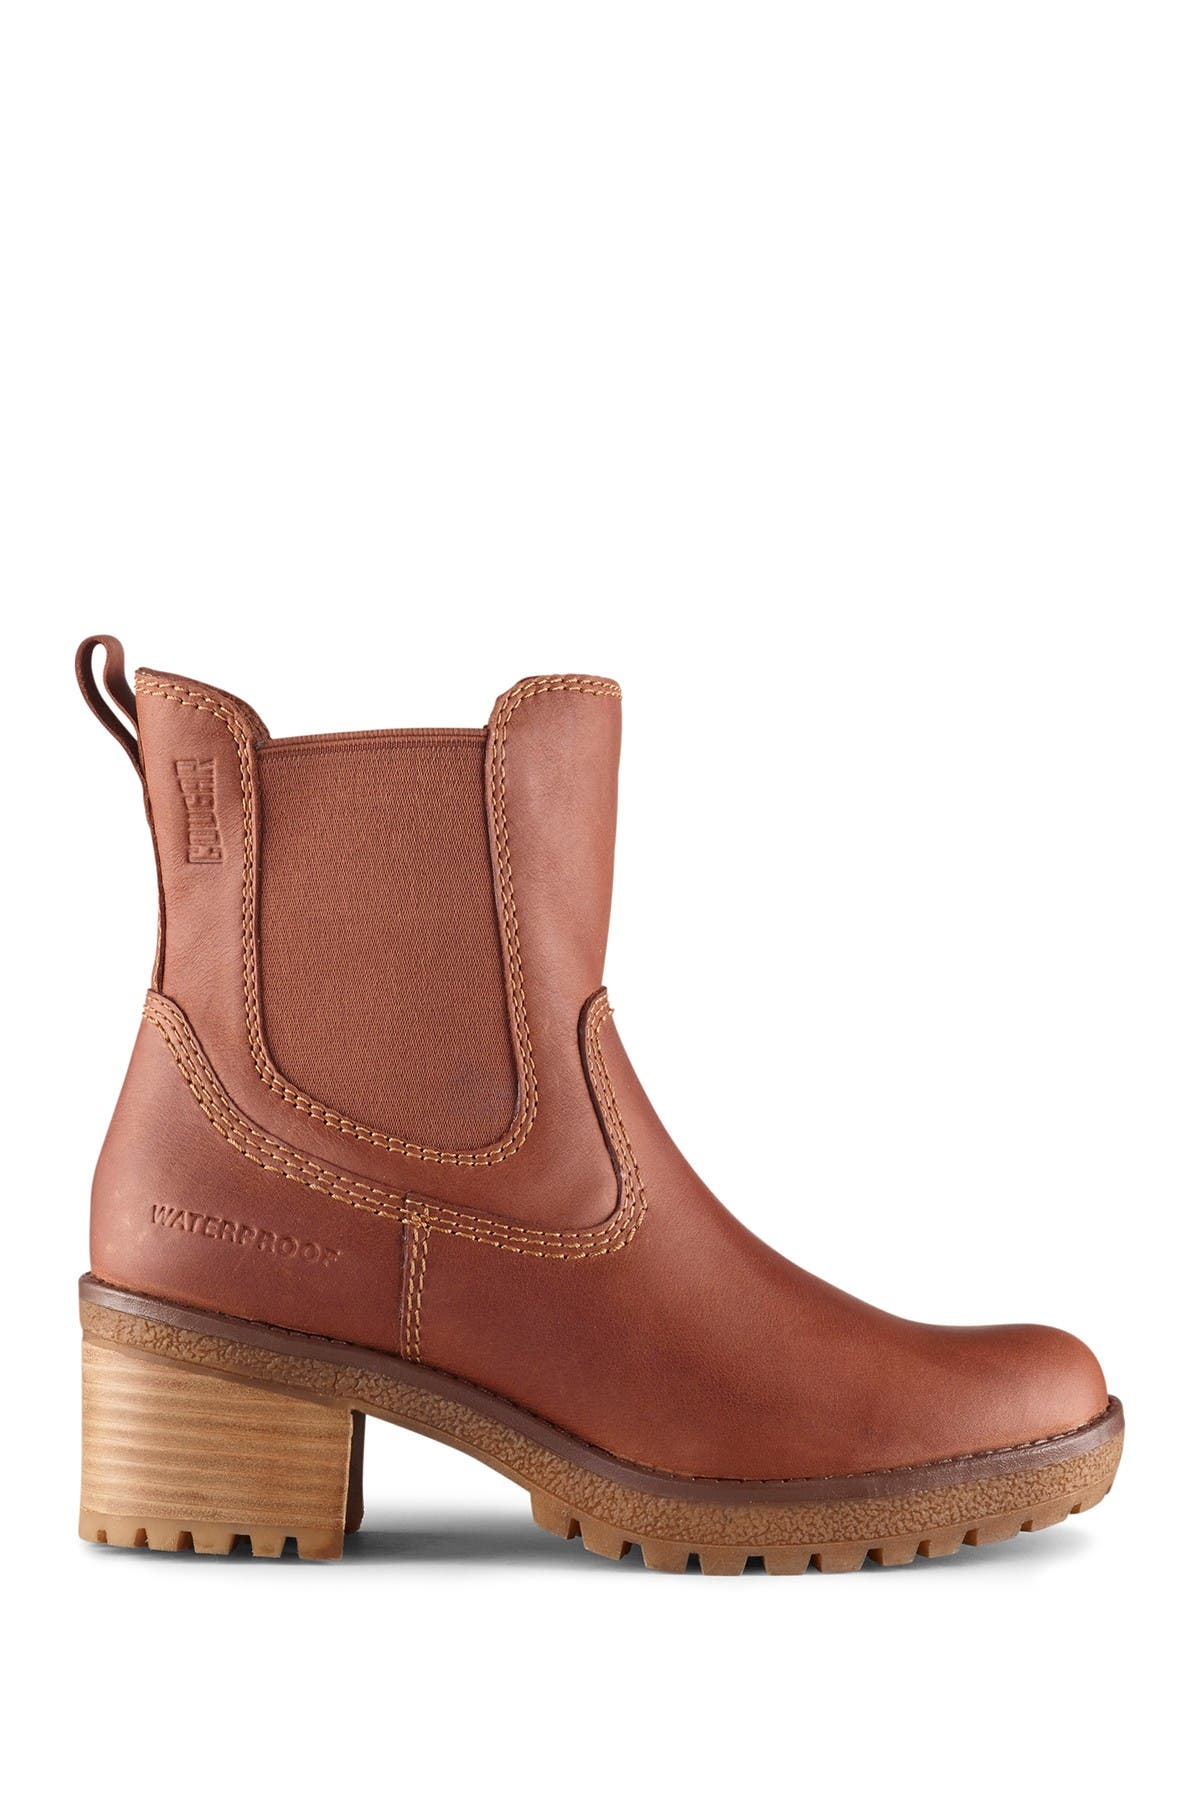 cougar dallas waterproof leather boot